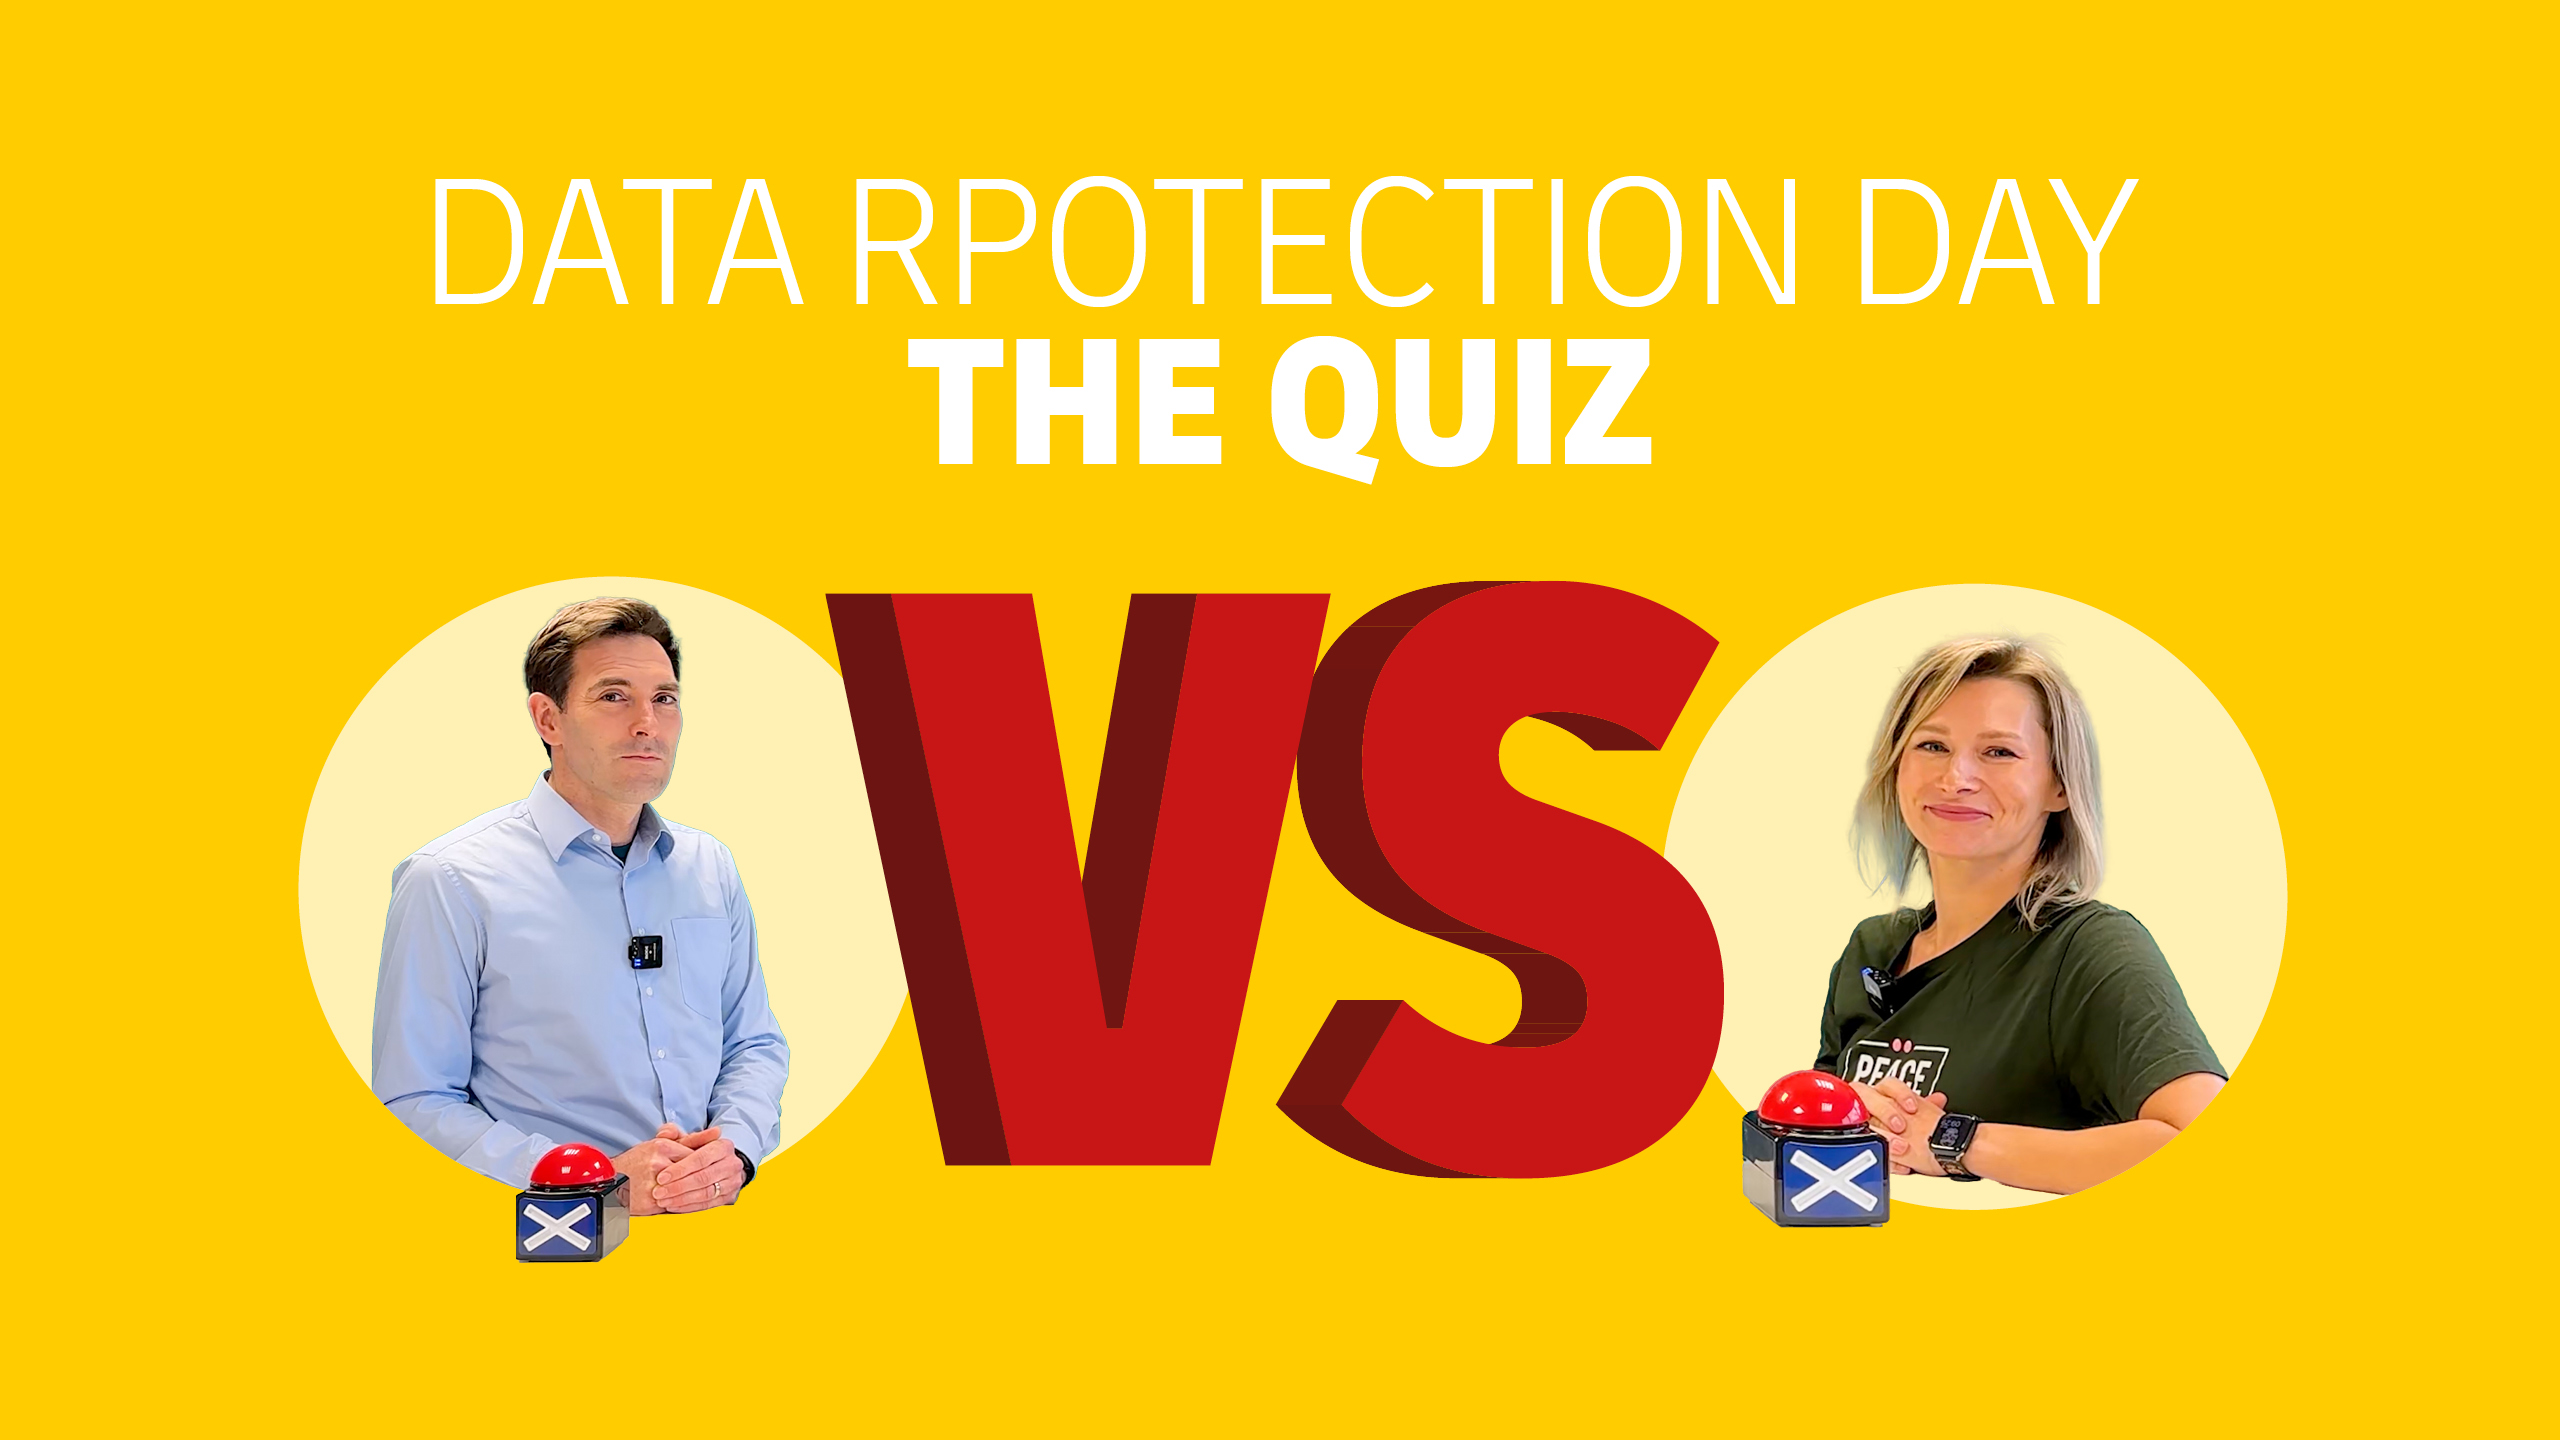 The Data Protection Day Quiz - with Malcolm Gammisch and Silvie van Etten